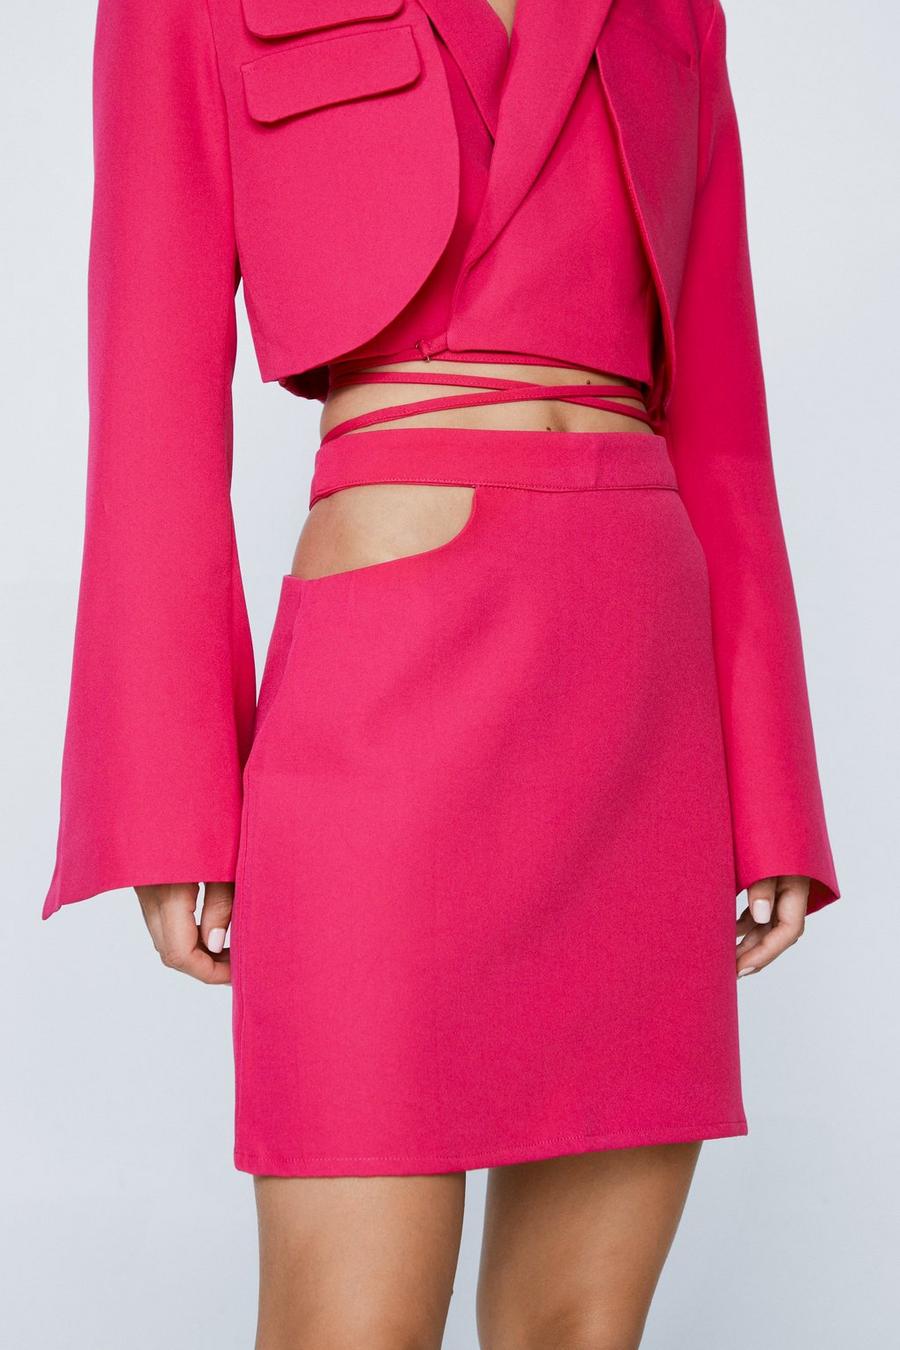 Tailored Cut Out Detail Mini Skirt